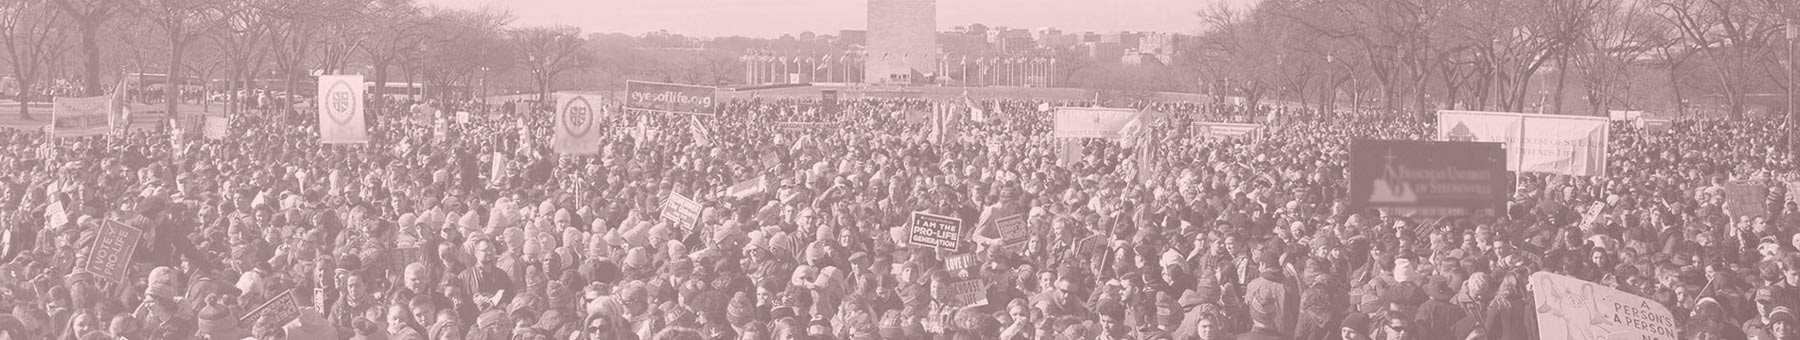 March for Life crowd near the Washington Monument